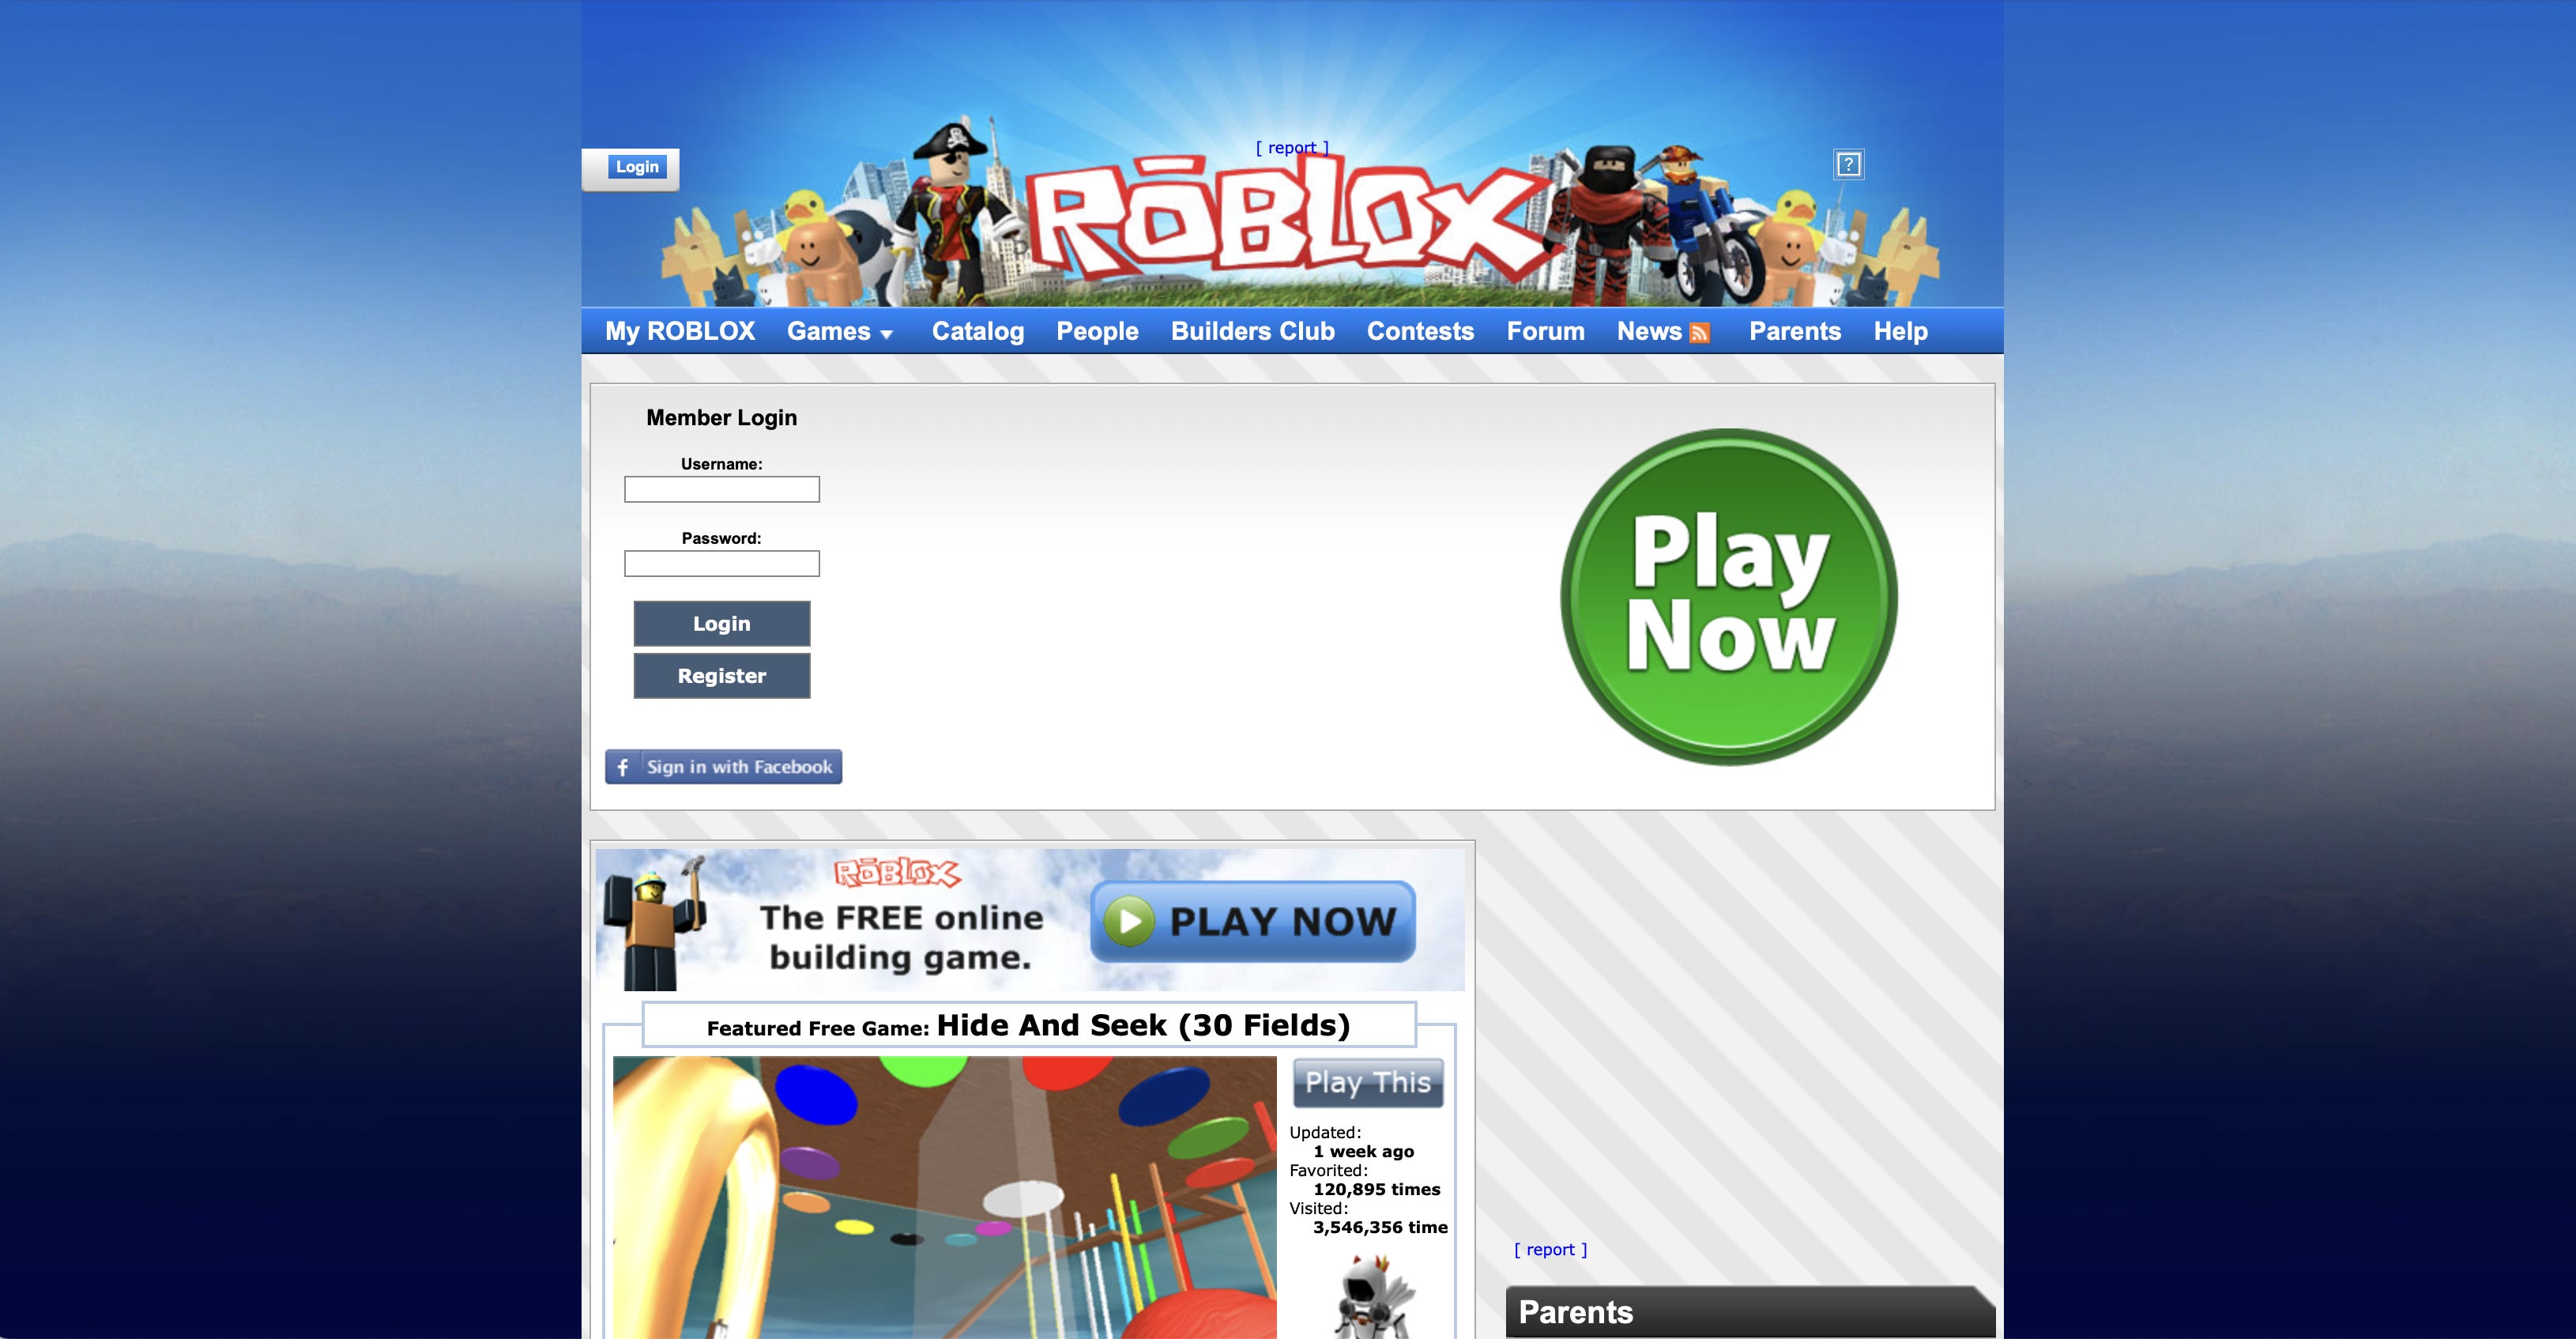 Roblox S Growth Strategies And Why Becoming A Metaverse Is A Bad Idea By Benjamin Schroeder No Ordinary Strategy - robux developer exchange rate